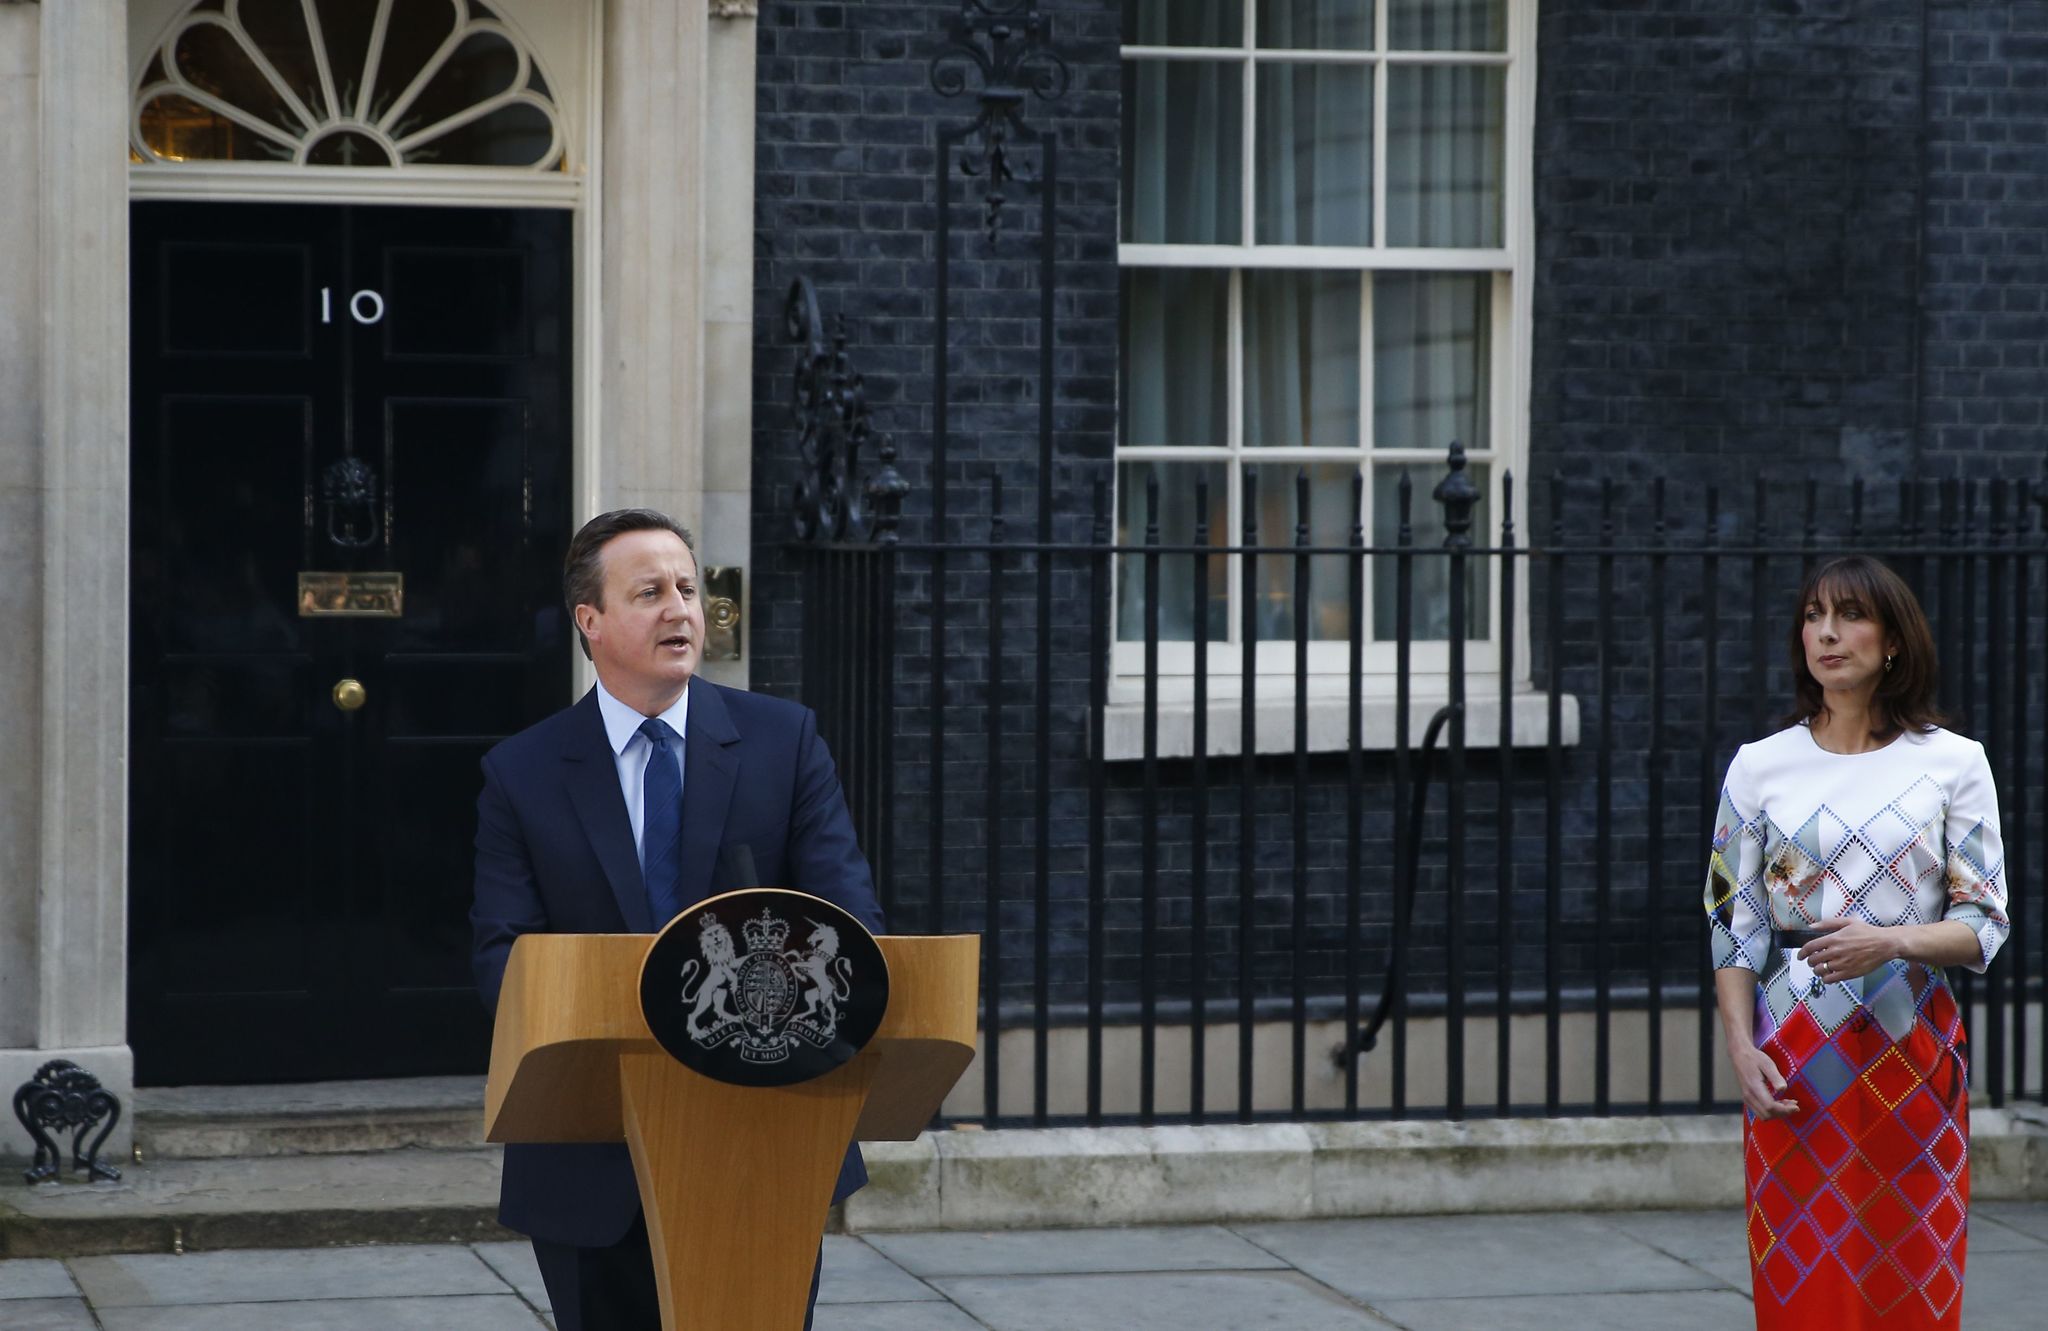 British Prime Minister David Cameron, accompanied by his wife, Samantha, speaks to the media in front of 10 Downing Street in London on Friday, saying he will resign.